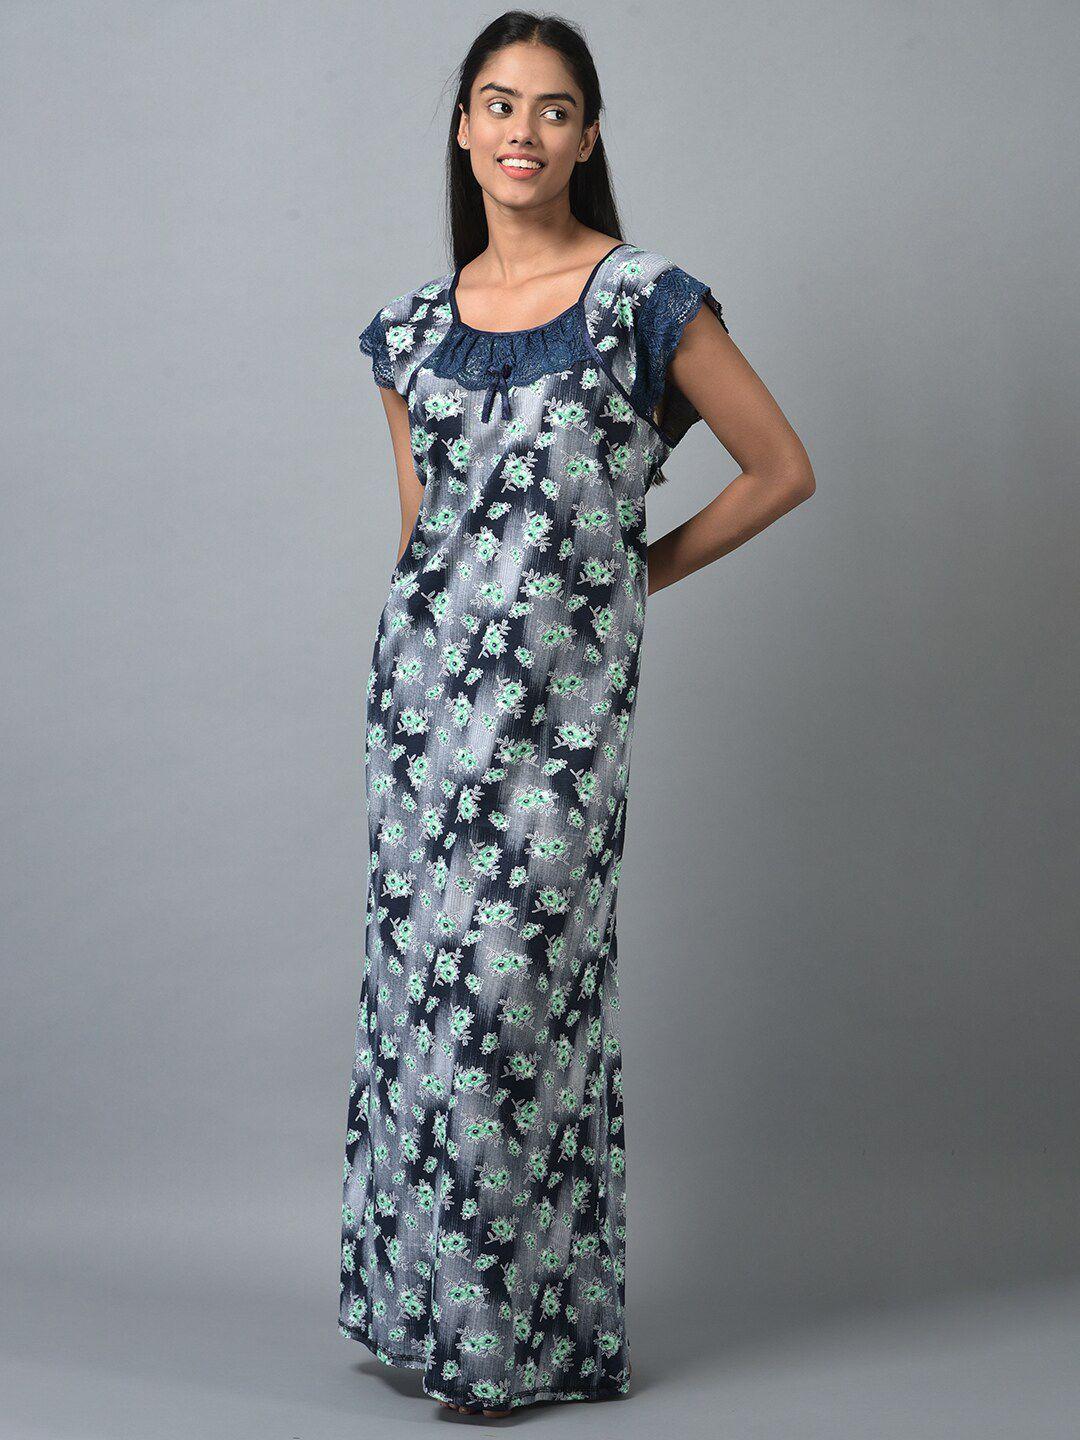 noty floral printed lace insert maxi nightdress